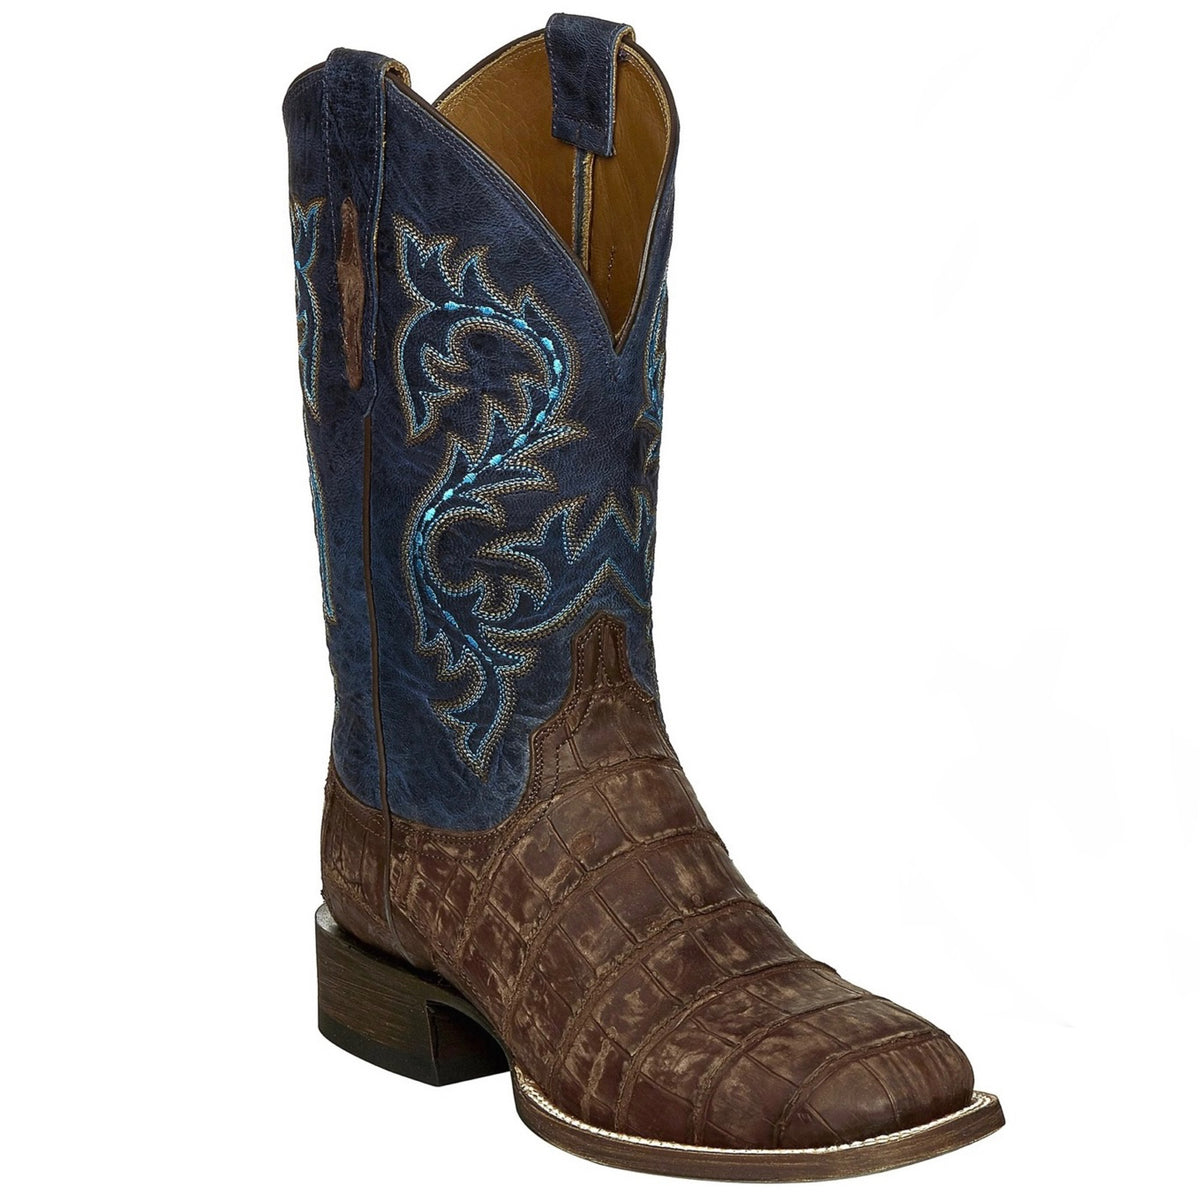 MEN’S LUCCHESE MALCOLM - BRANDY GIANT ALLIGATOR BOOTS